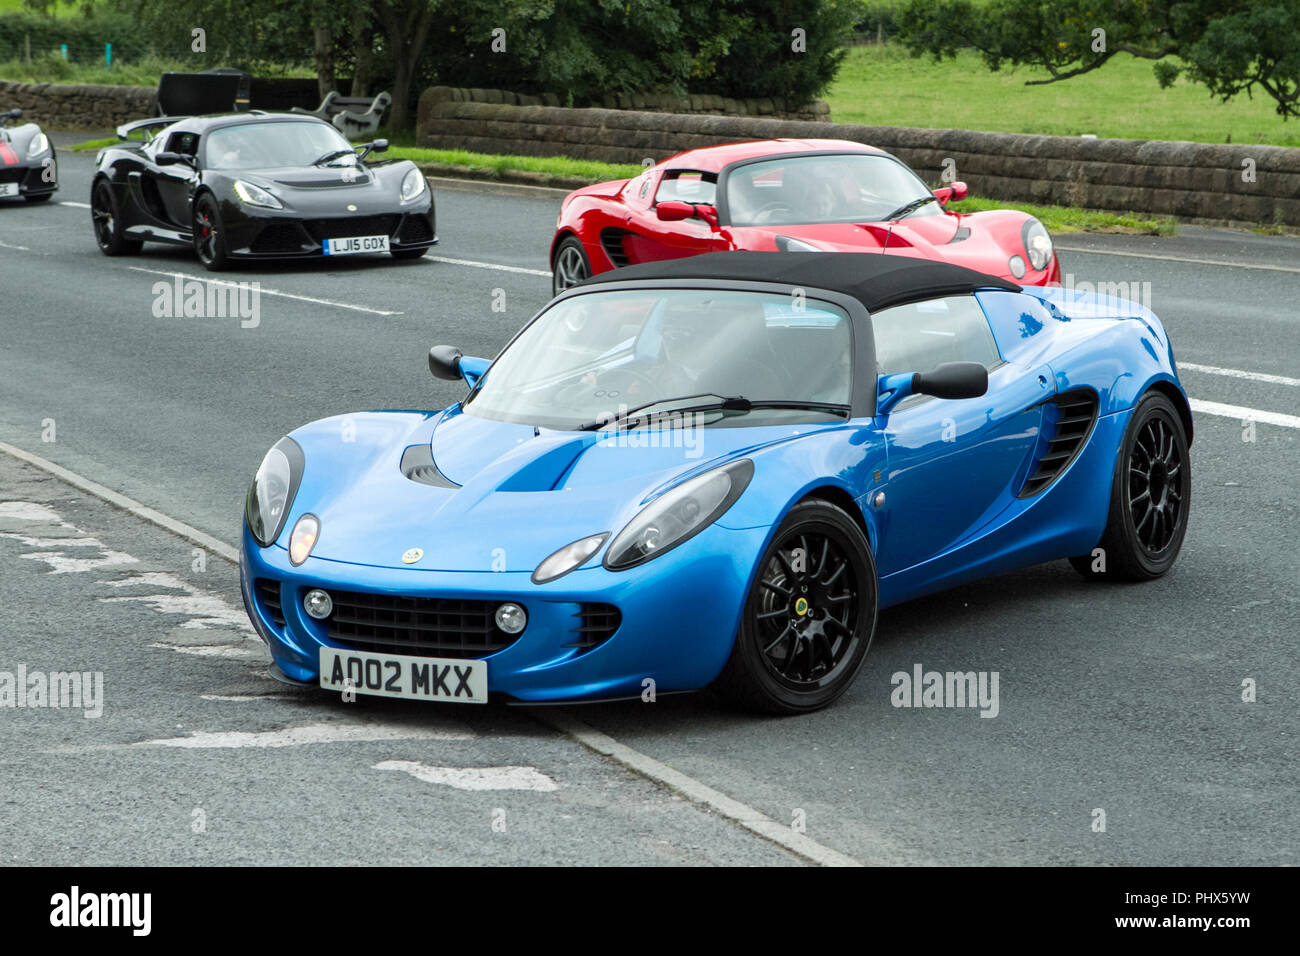 Blue A002MKX Lotus Elise at Hoghton towers annual classic vintage car rally, UK Stock Photo